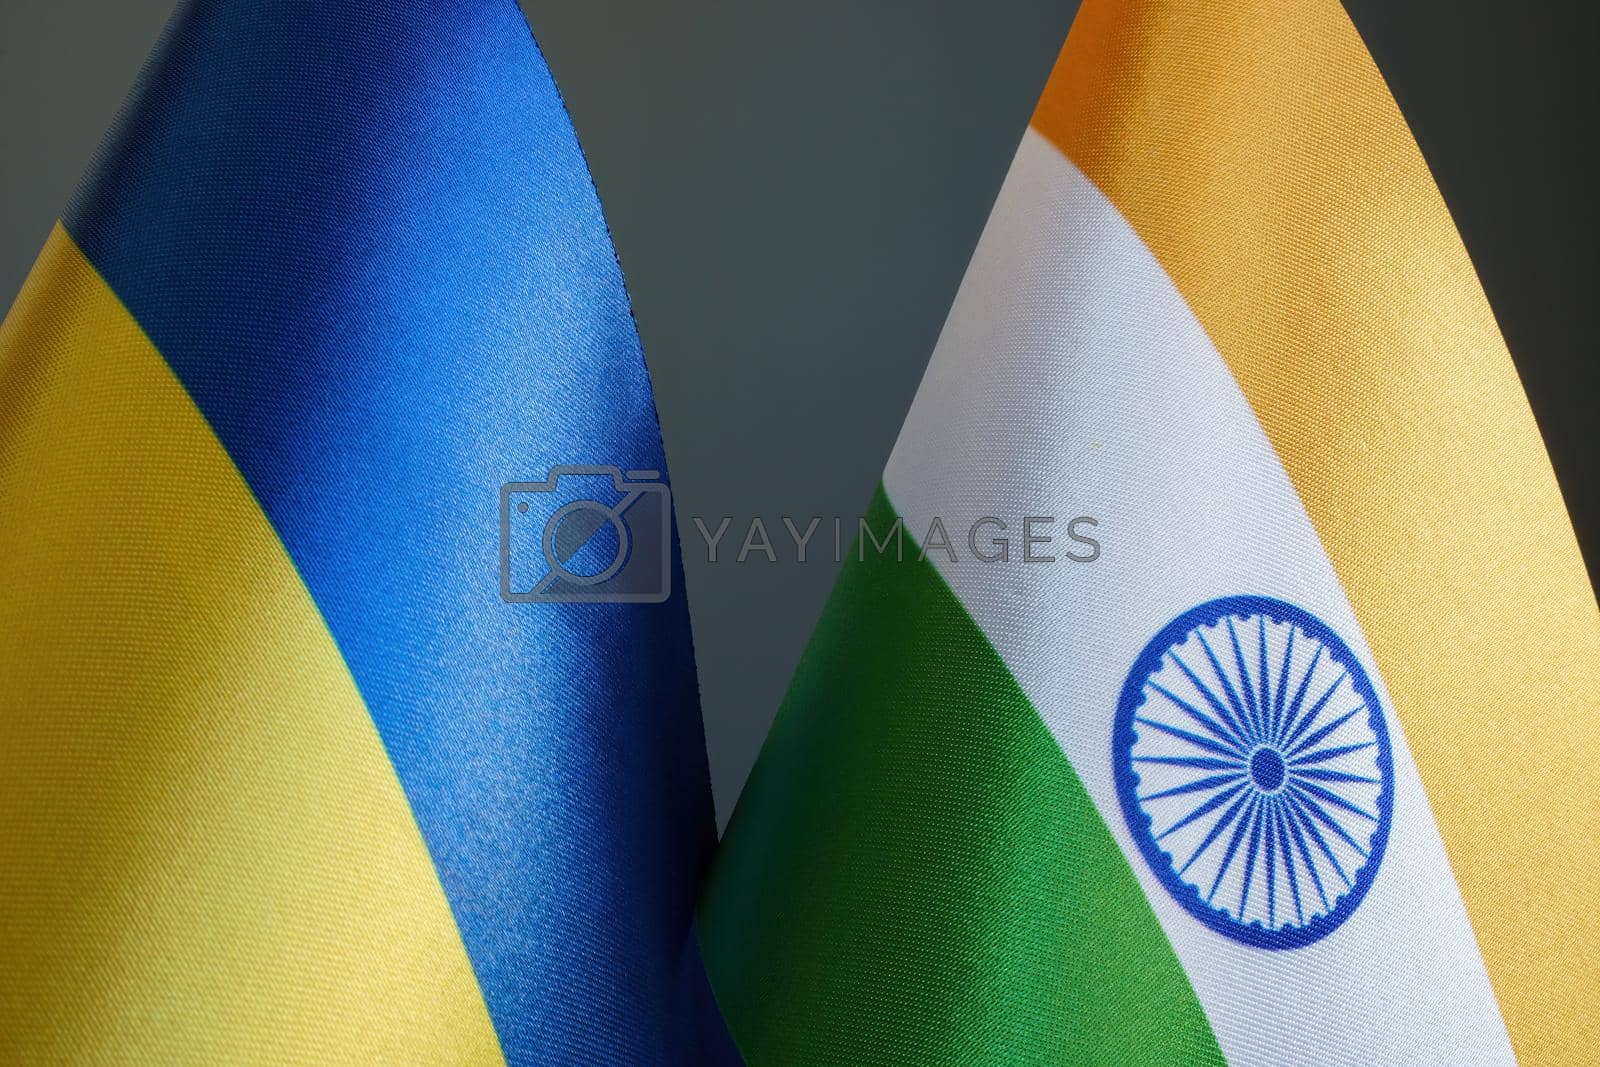 Royalty free image of Close-up of the flags of Ukraine and India. by designer491